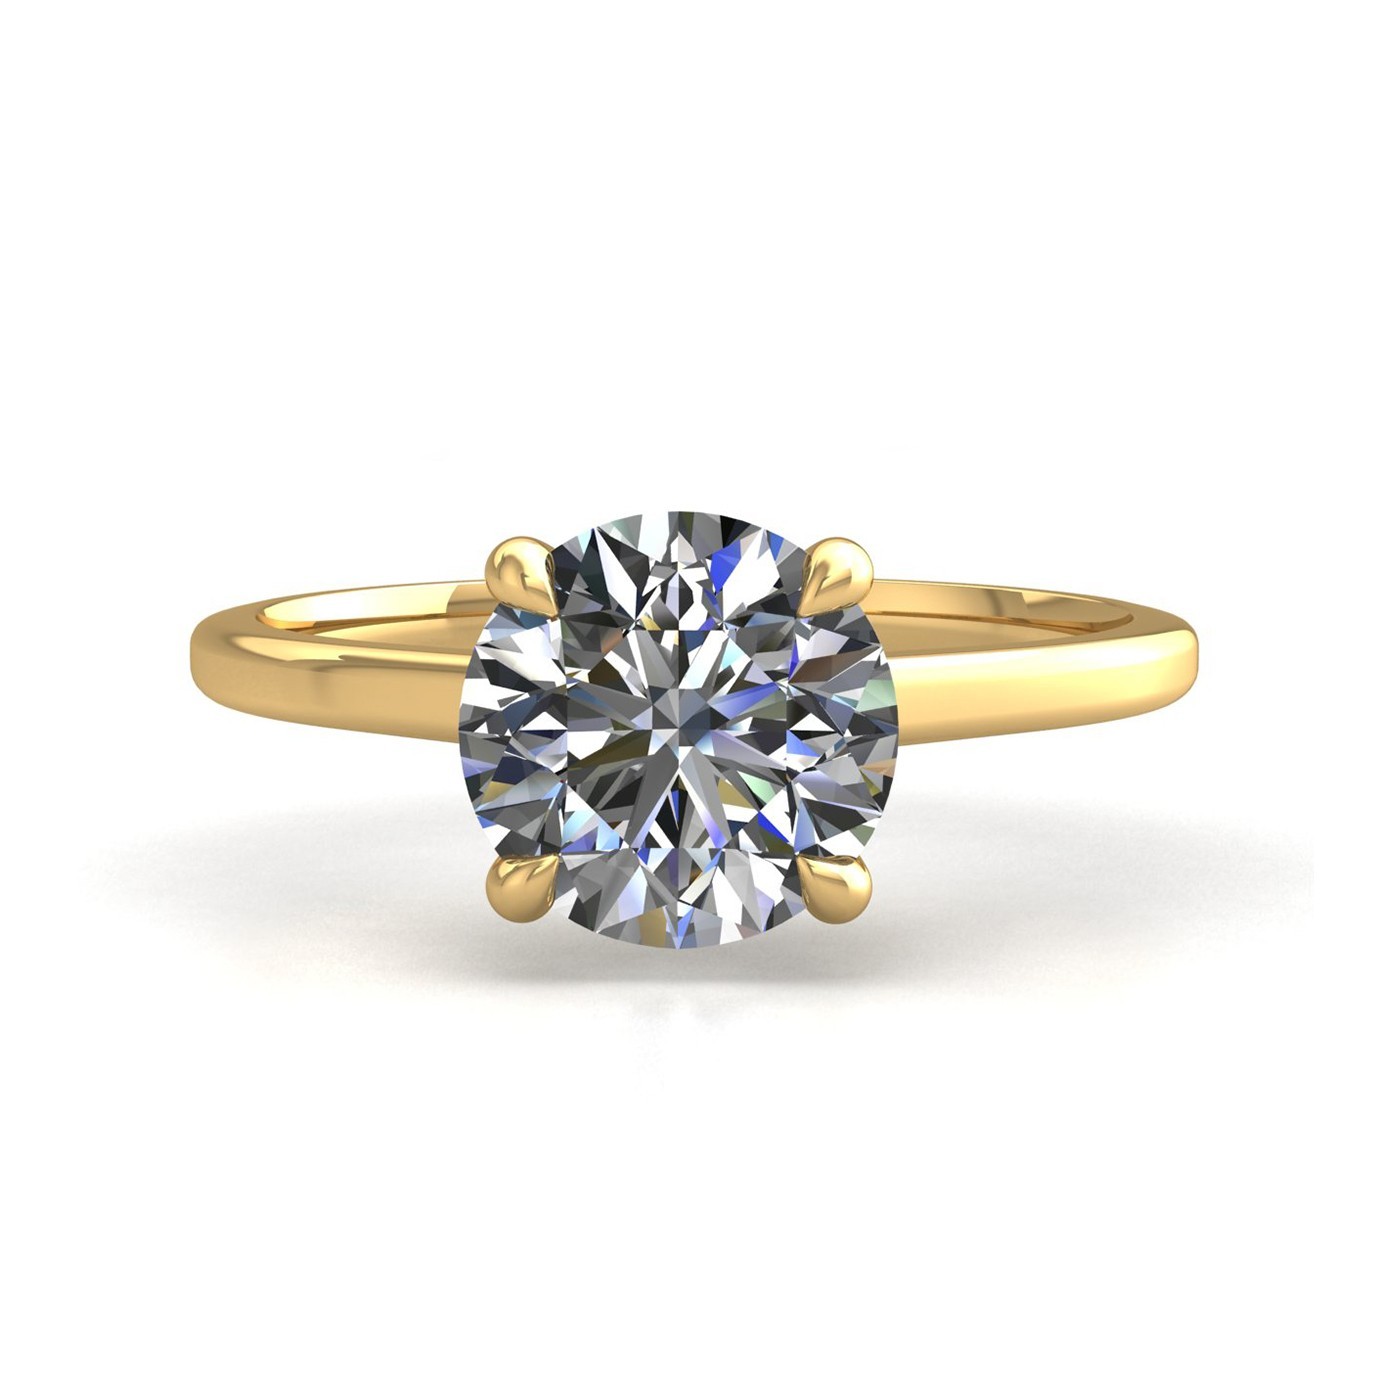 18k yellow gold 1.2ct 4 prongs solitaire round cut diamond engagement ring with whisper thin band Photos & images